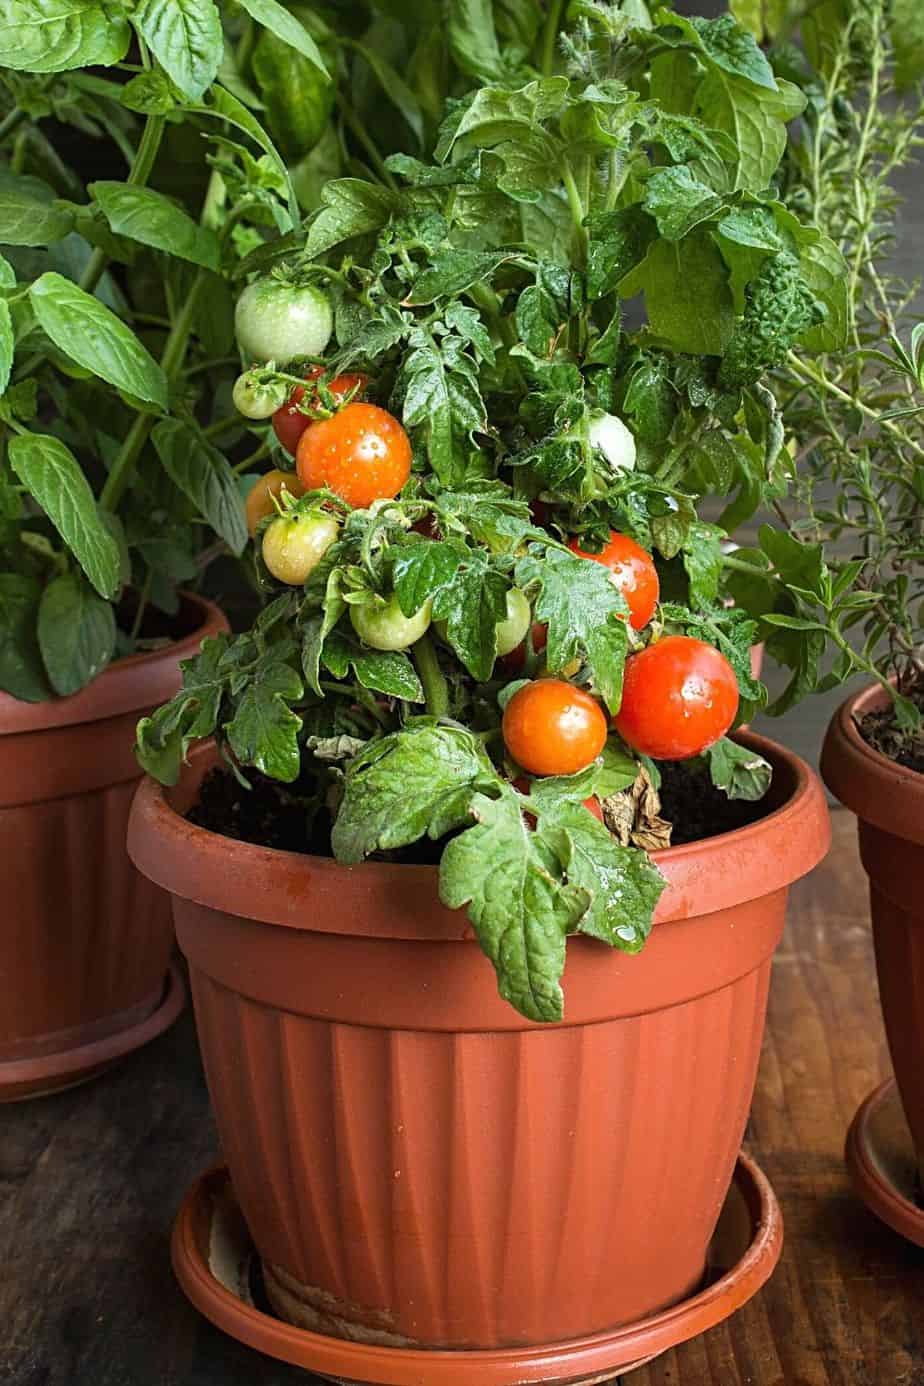 Tomato, a fruit and not a vegetable, is a plant you can easily grow in a pot on your east-facing balcony